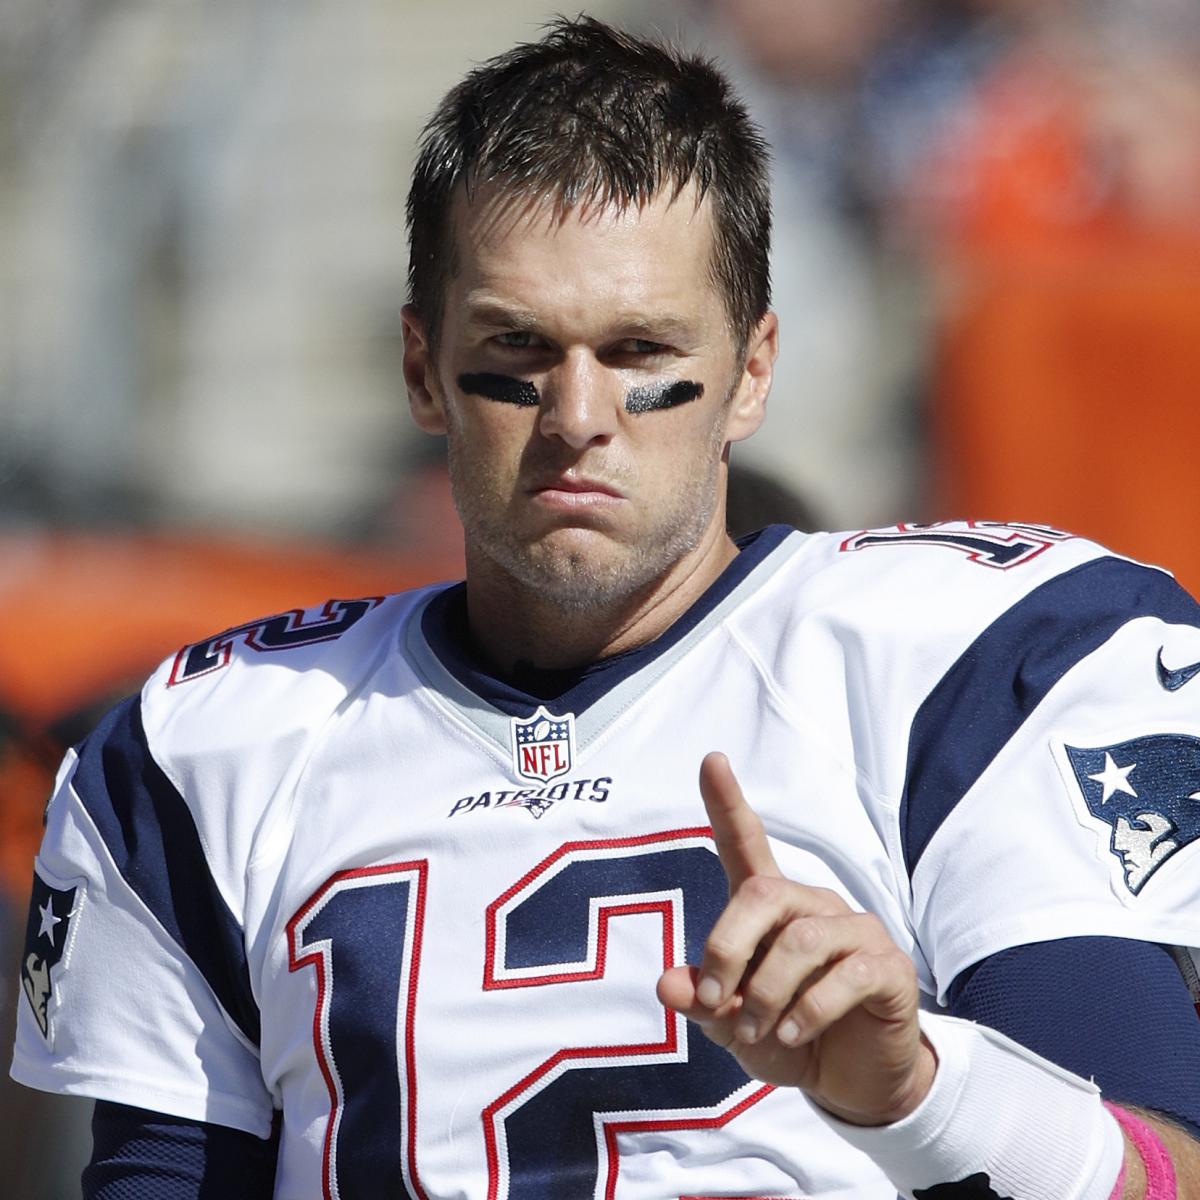 NFL1000: Is This the Scariest Tom Brady Yet? | Bleacher Report | Latest News, Videos ...1200 x 1200